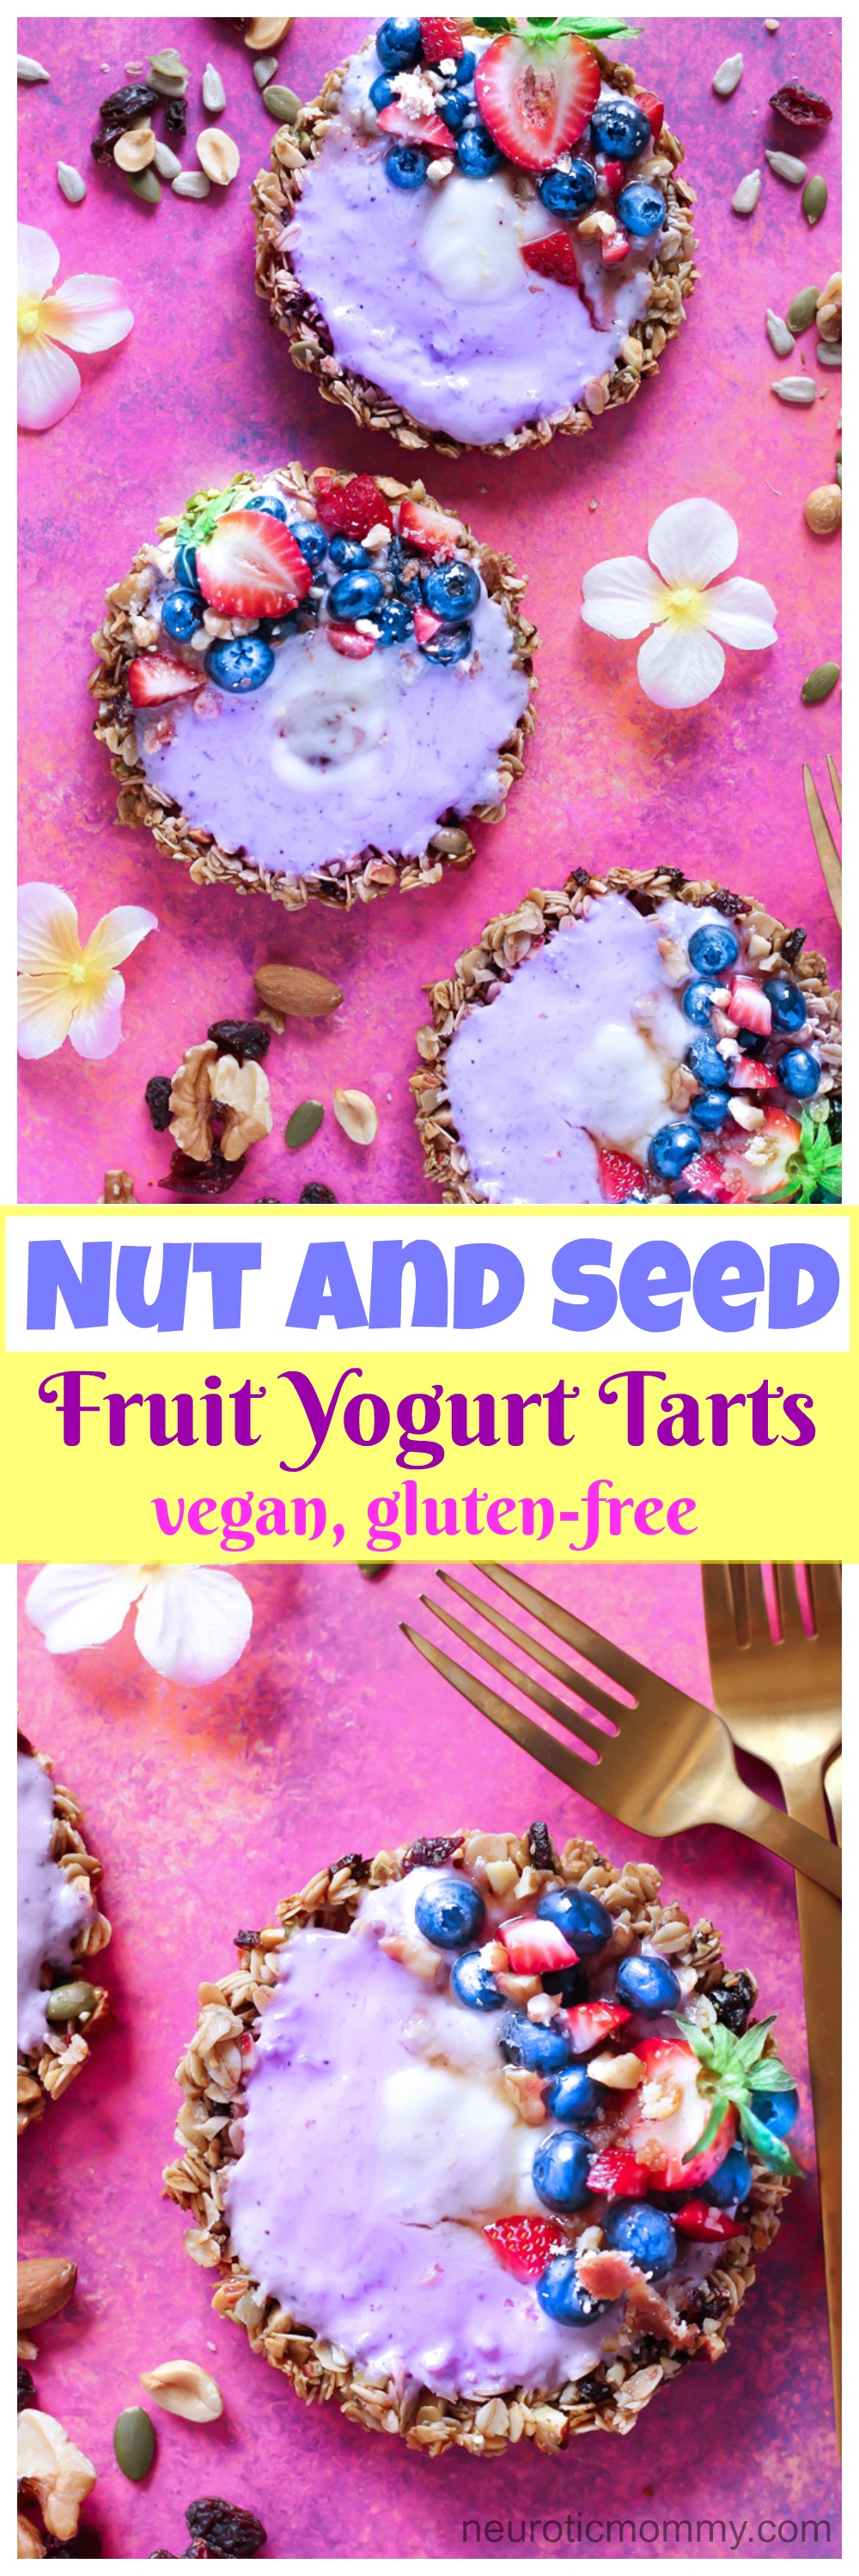 Nut and Seed Fruit Yogurt Tarts [Vegan] - These tarts not only look super pretty, they are filled with vegan blueberry yogurt and surrounded by an array of delicious mixed nuts like walnuts, almonds, sunflower seeds and peanuts. Add some fresh berries on top and enjoy this sweet treat as breakfast, snack or dessert. NeuroticMommy.com #healthy #vegan #easter #tarts